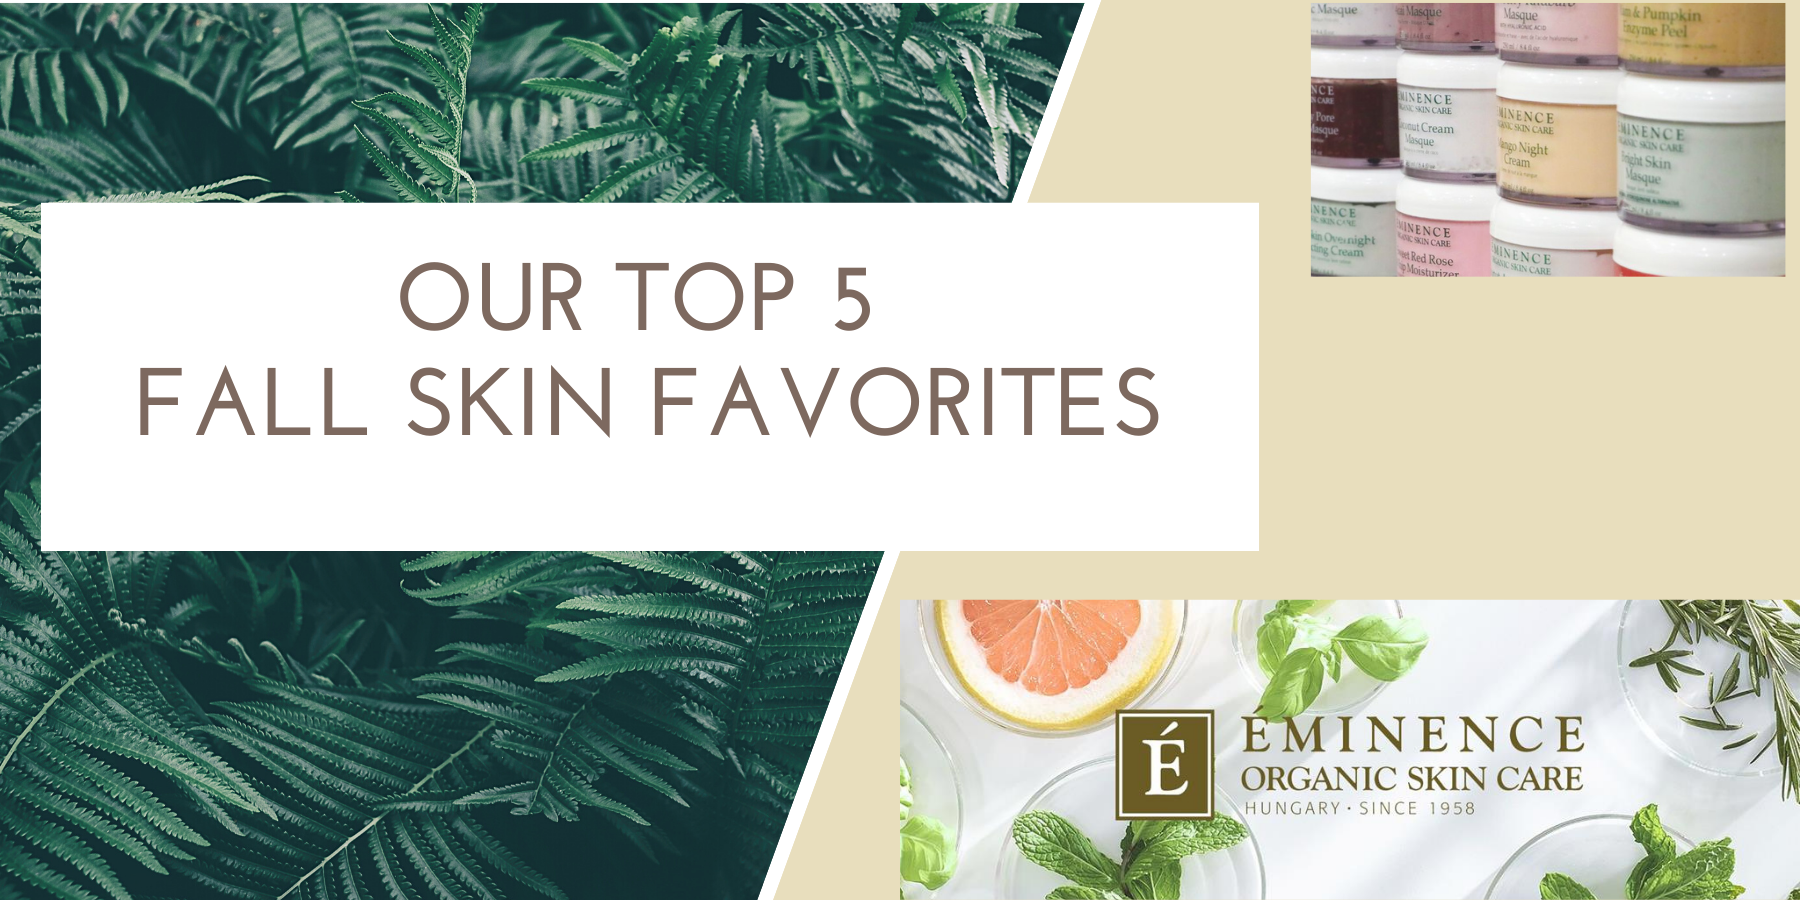 Our Top 5 Fall Skin Favorites by Eminence Organics